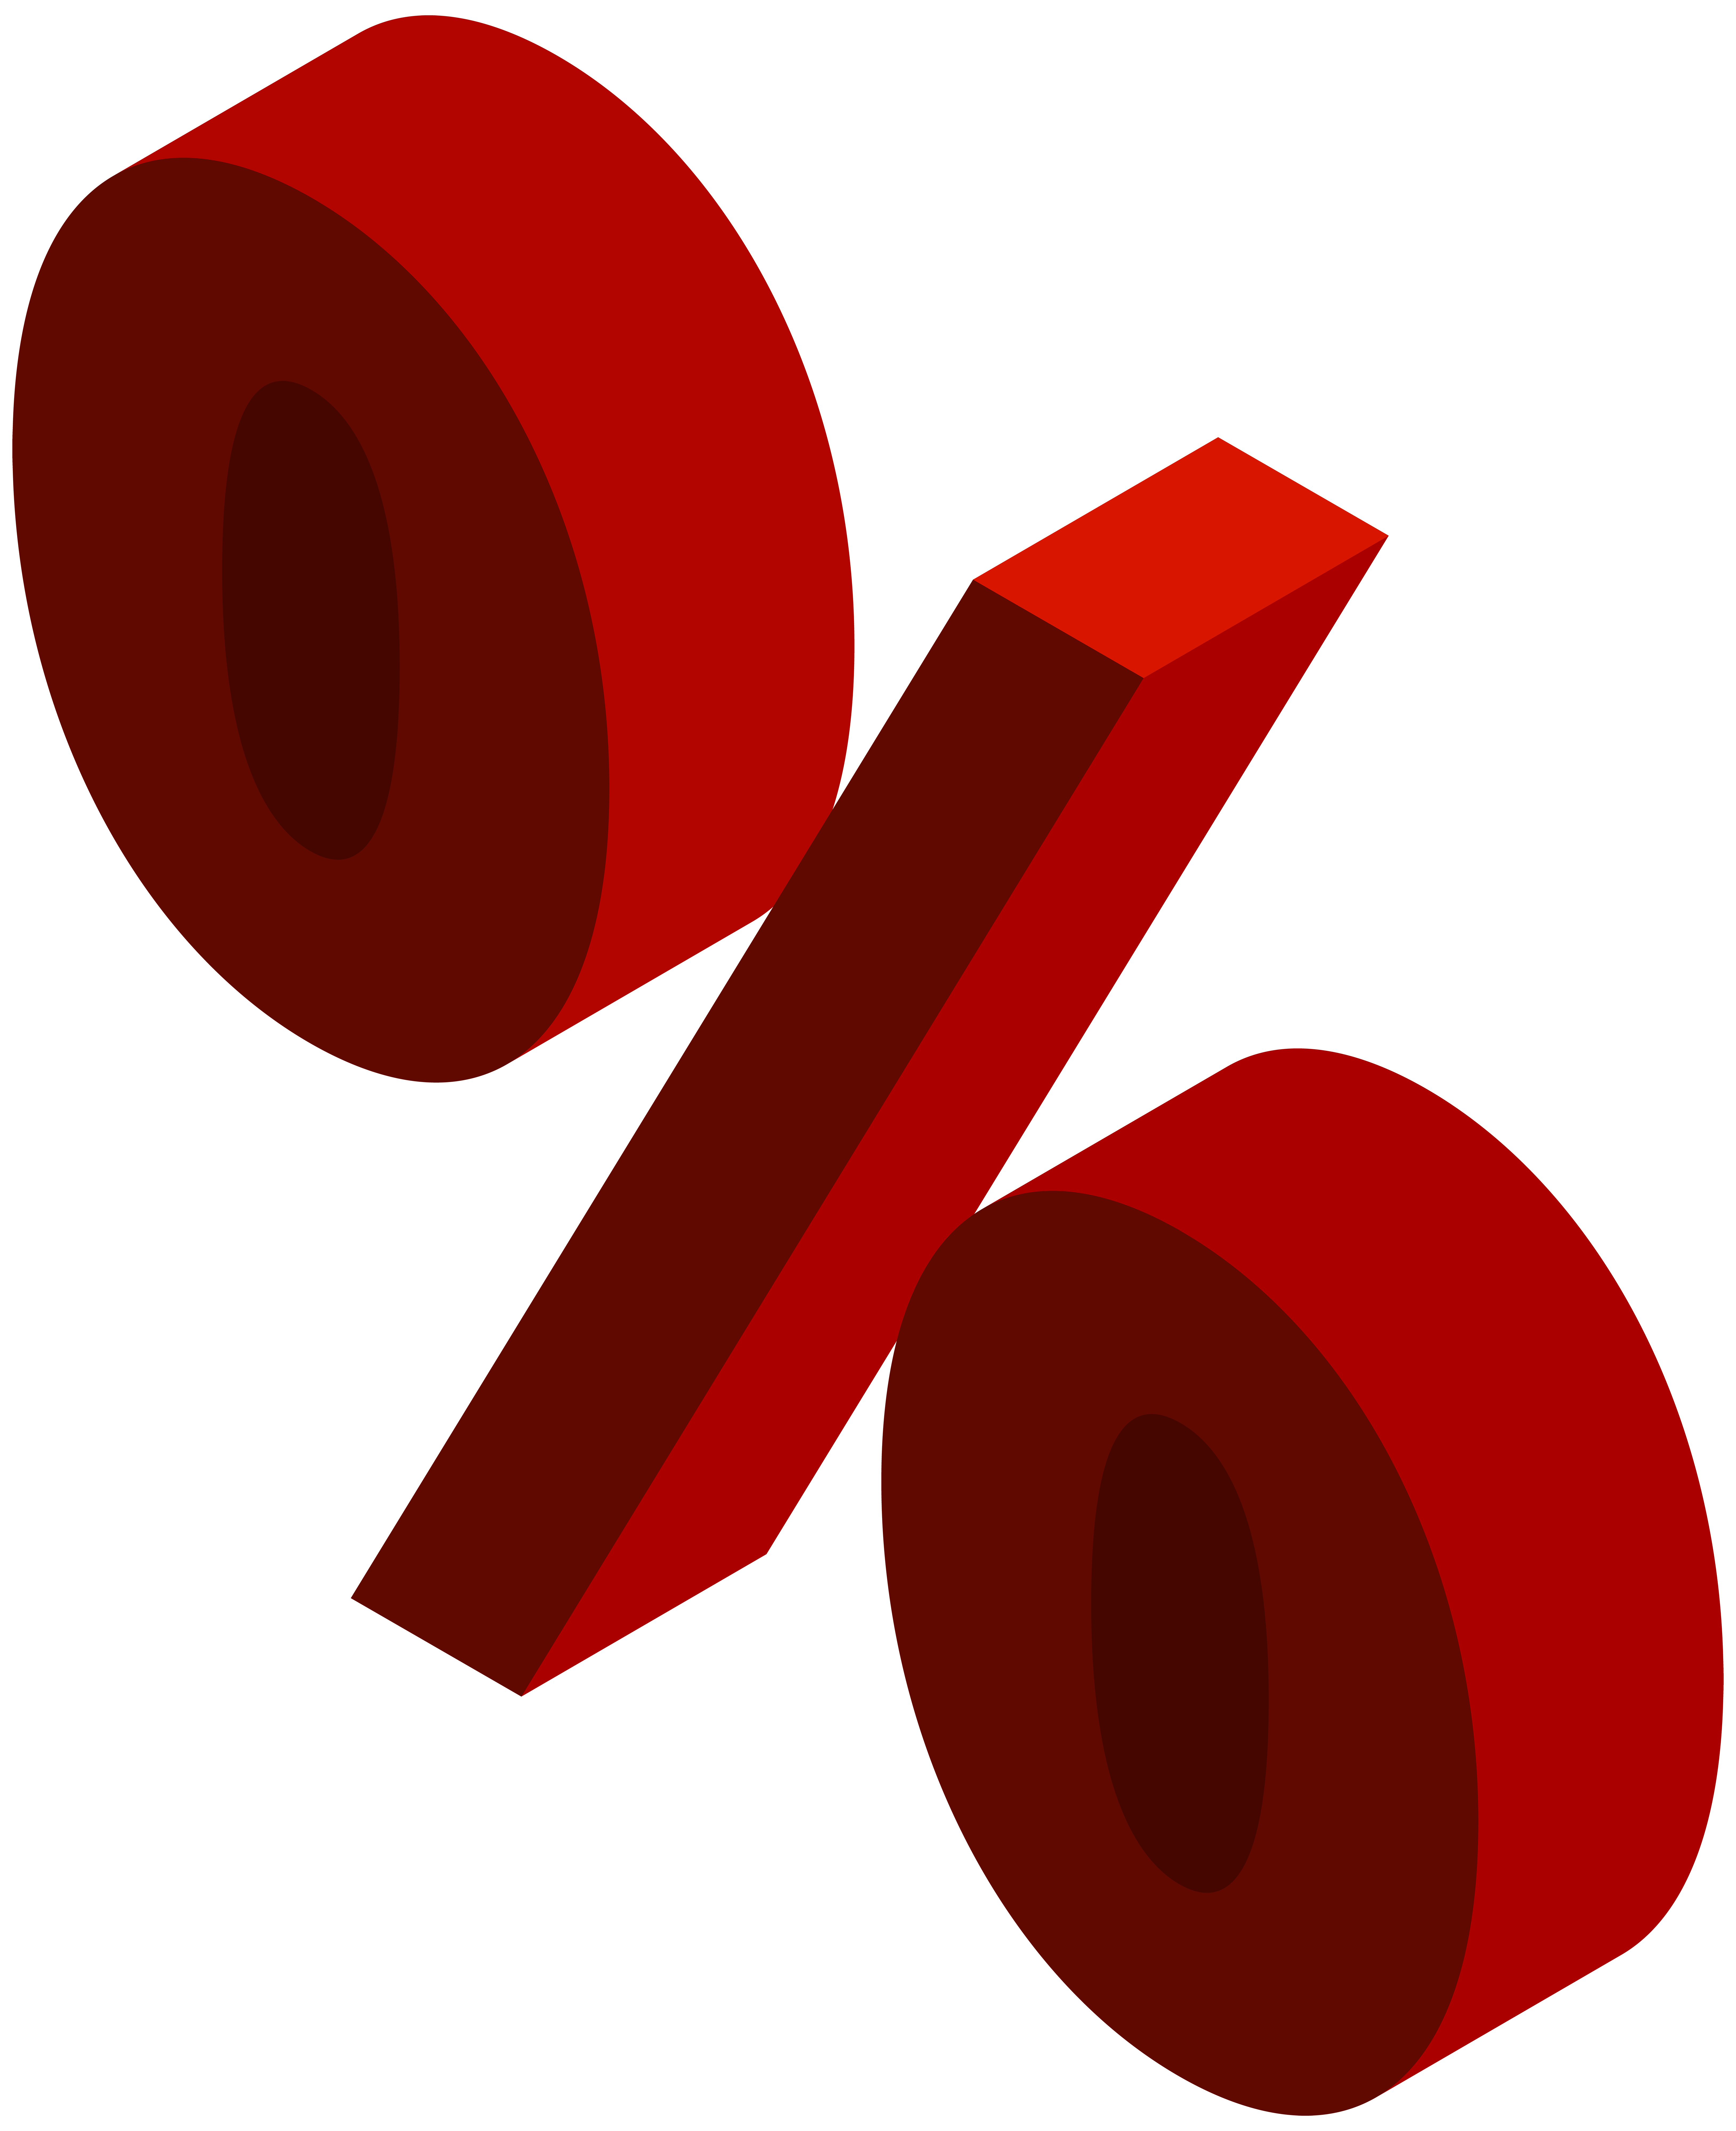 percent-sign-transparent-clip-art-image-gallery-yopriceville-high